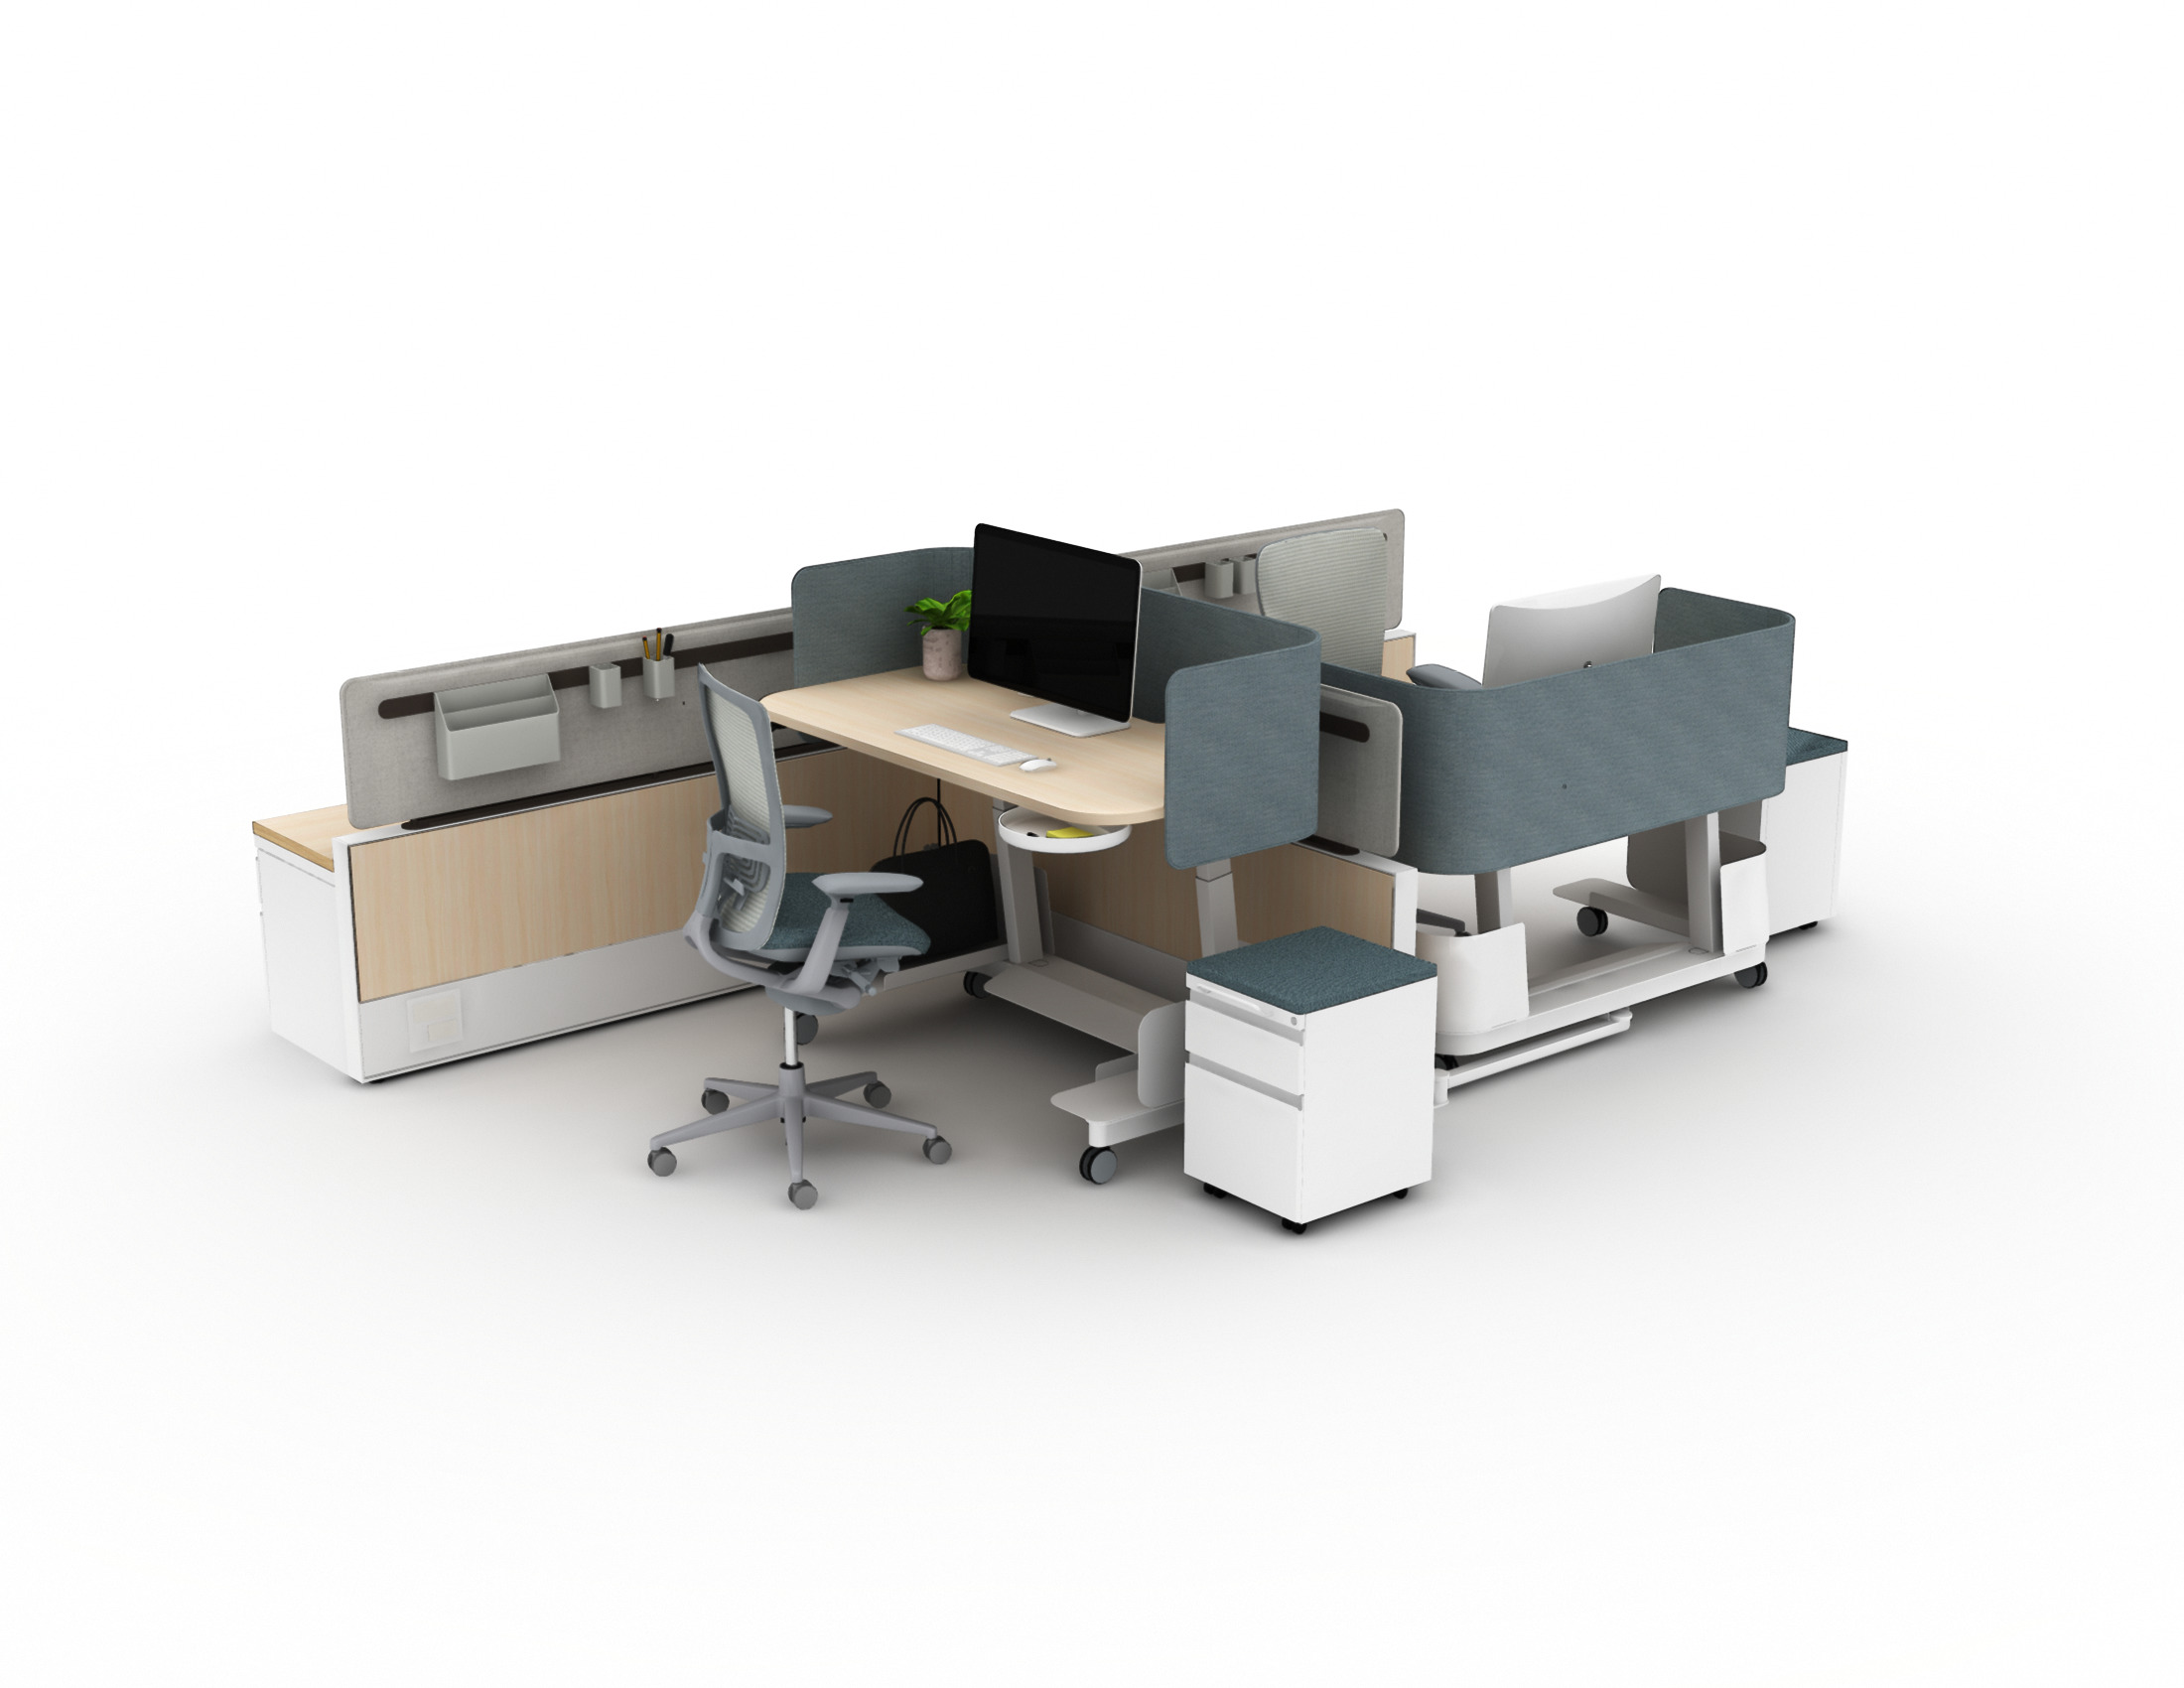 Compose Panel Based System, Compose Echo Height Adjustable Table, Compose Echo, Zody II Seating, X Series Storage, Belong Work Tools